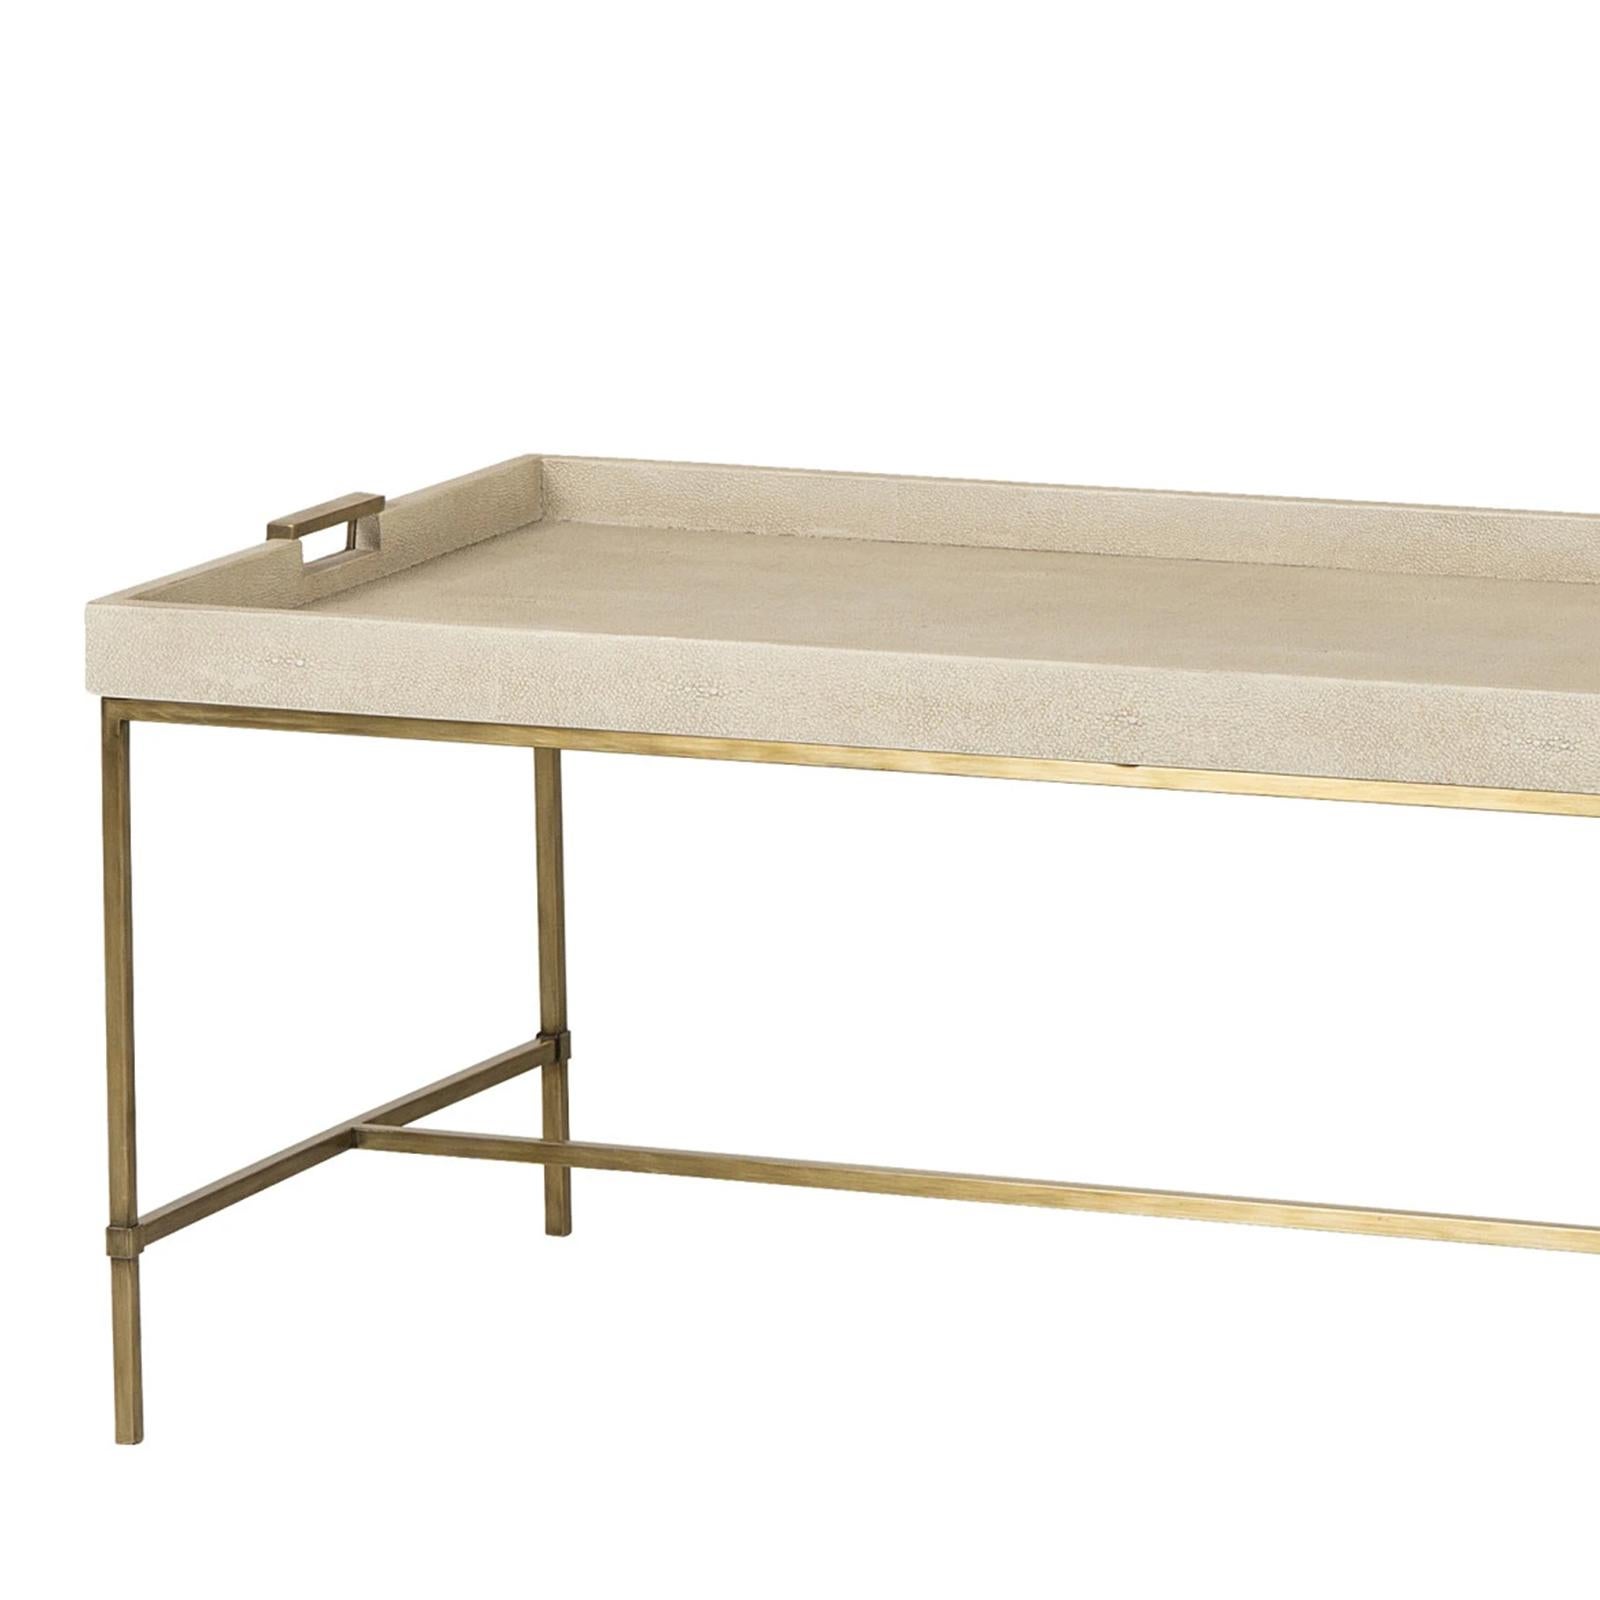 Coffee table Shagry cream with base in stainless steel
 in brass finish. With top in poplar wood covered with 
cream shagreen.